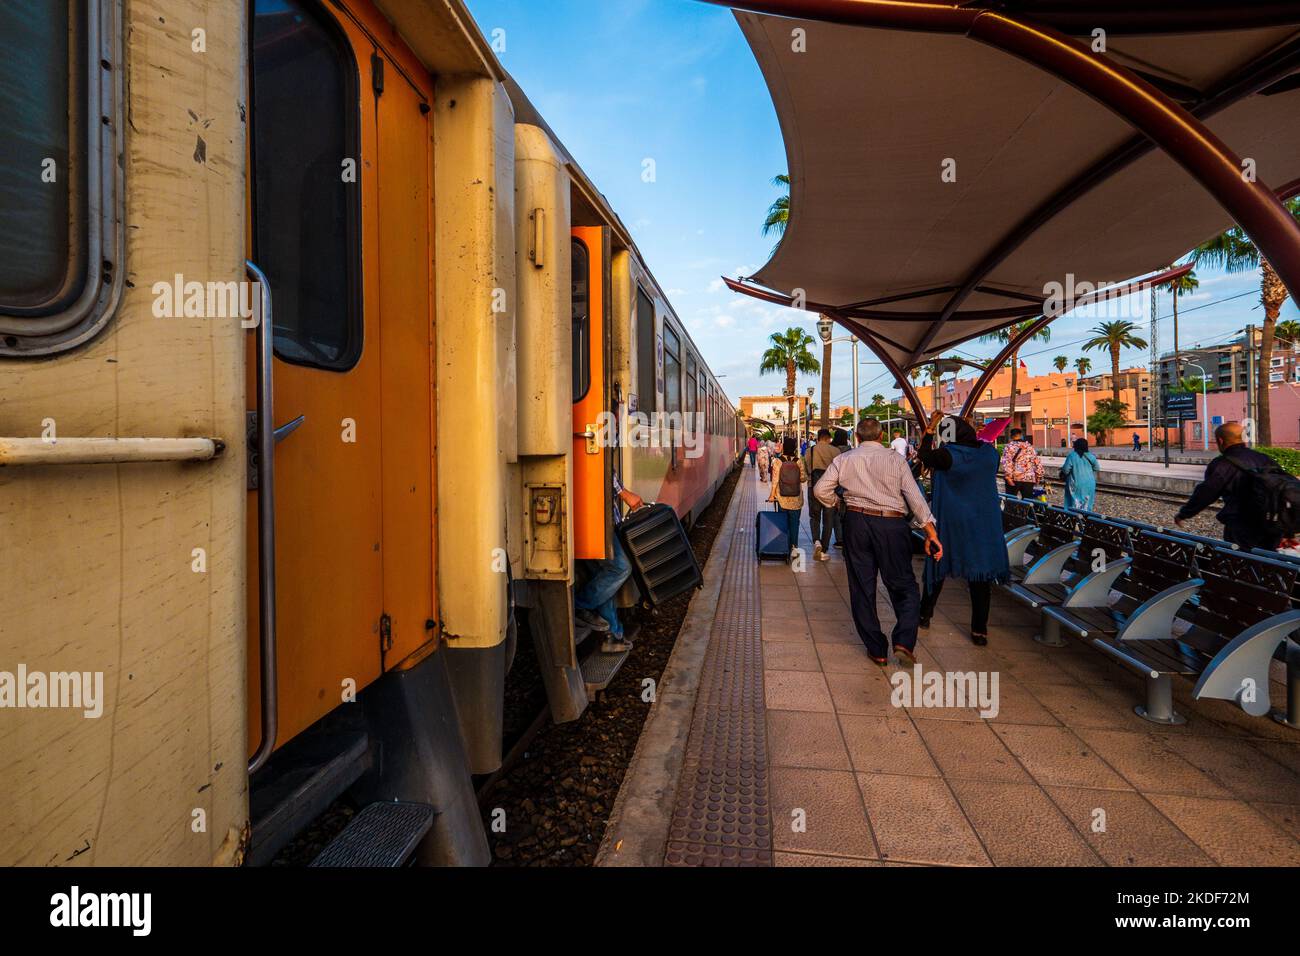 The railway station in Marrakech, Morocco Stock Photo